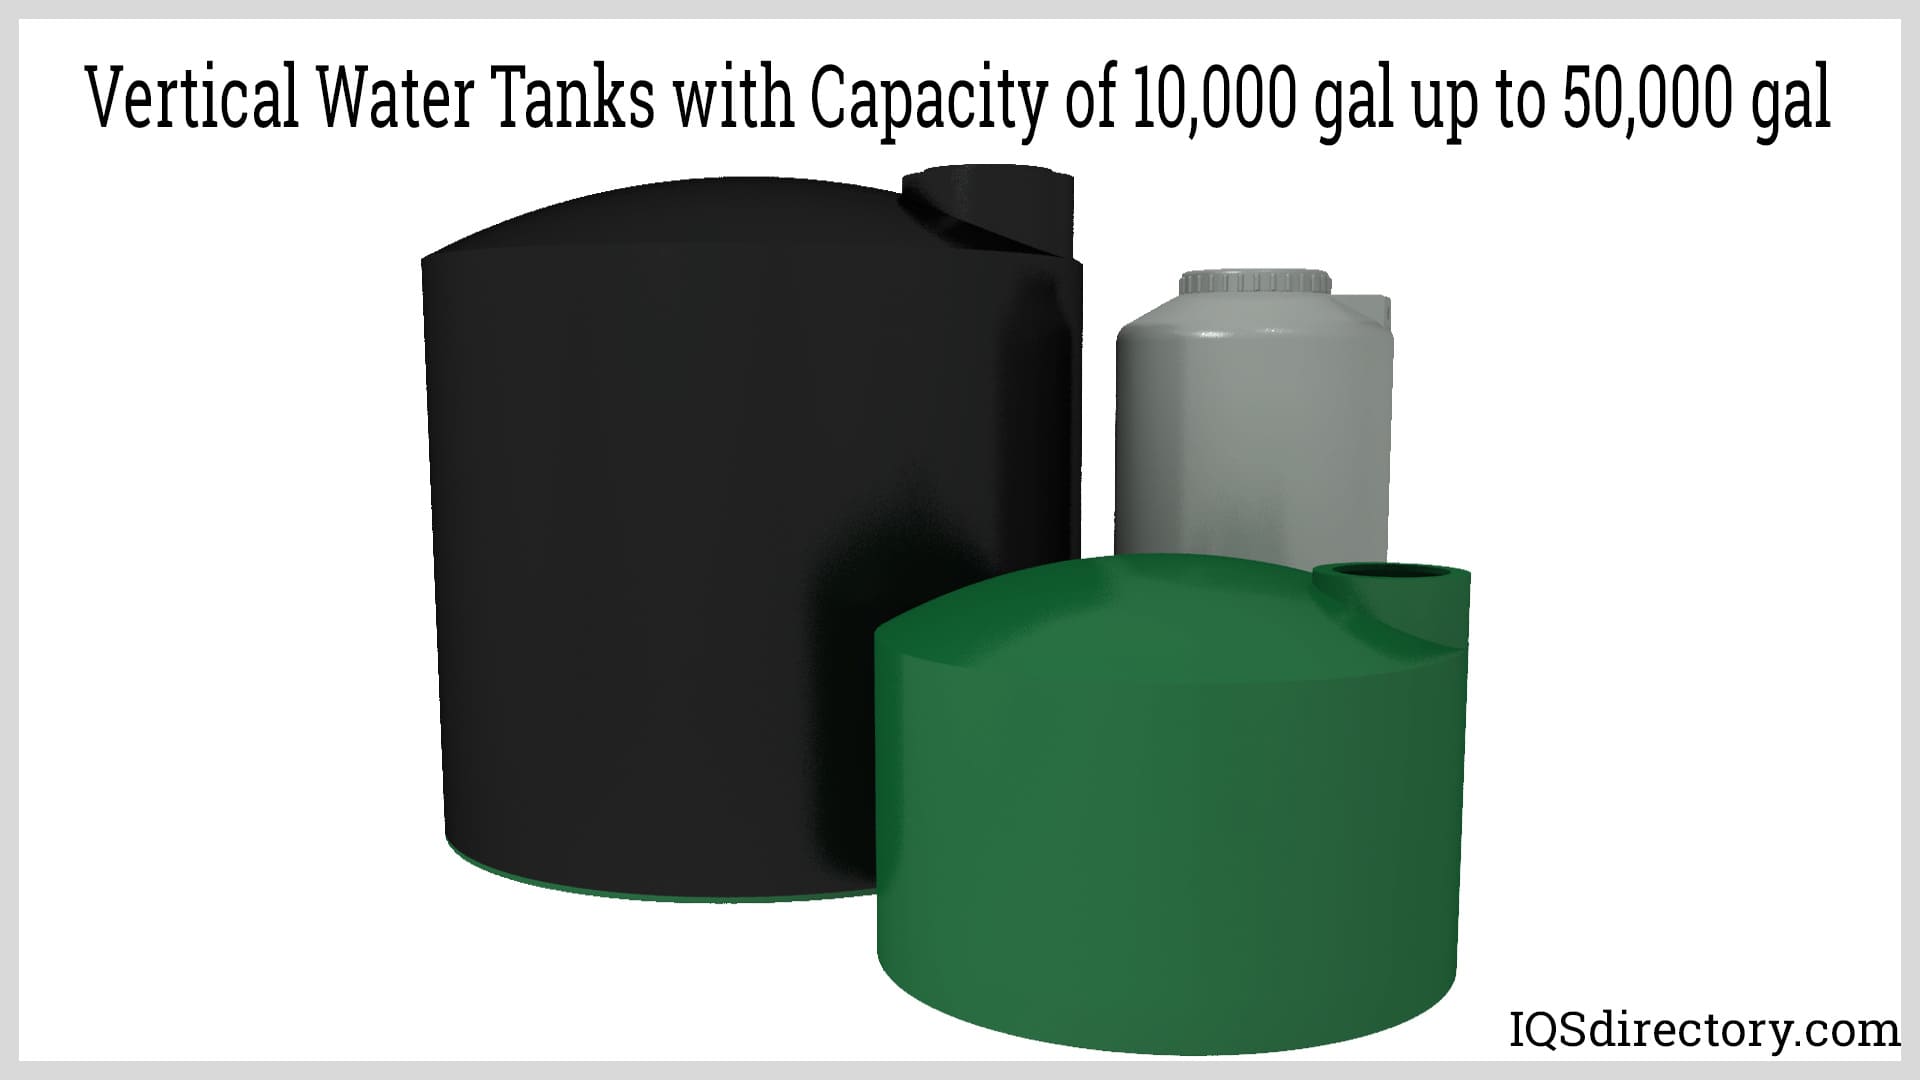 Vertical Water Tanks with Capacity of 10,000 gal up to 50,000 gal